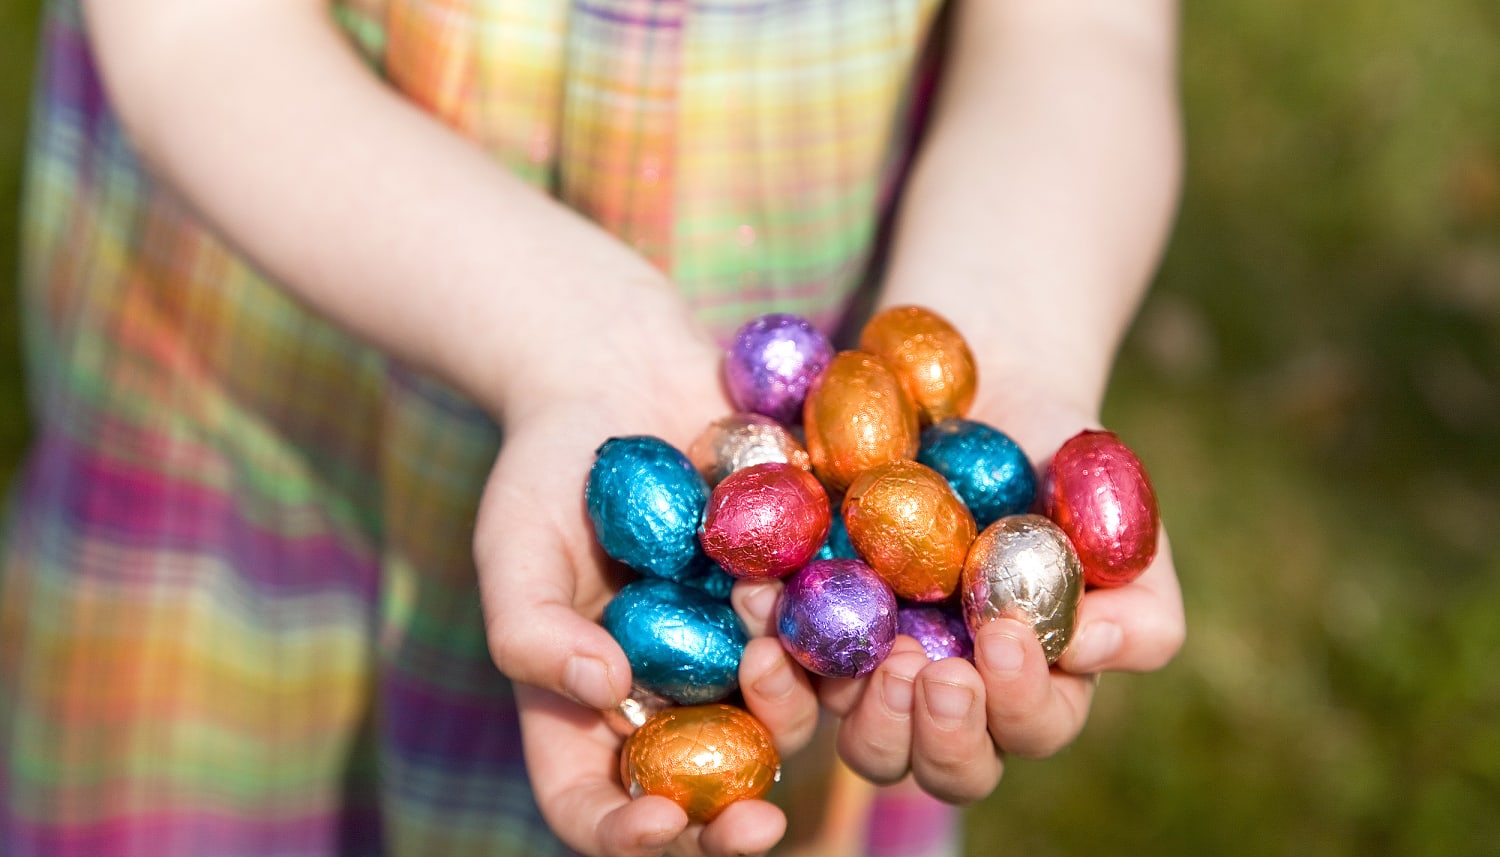 The 8 'healthiest' Easter candies, according to dietitians